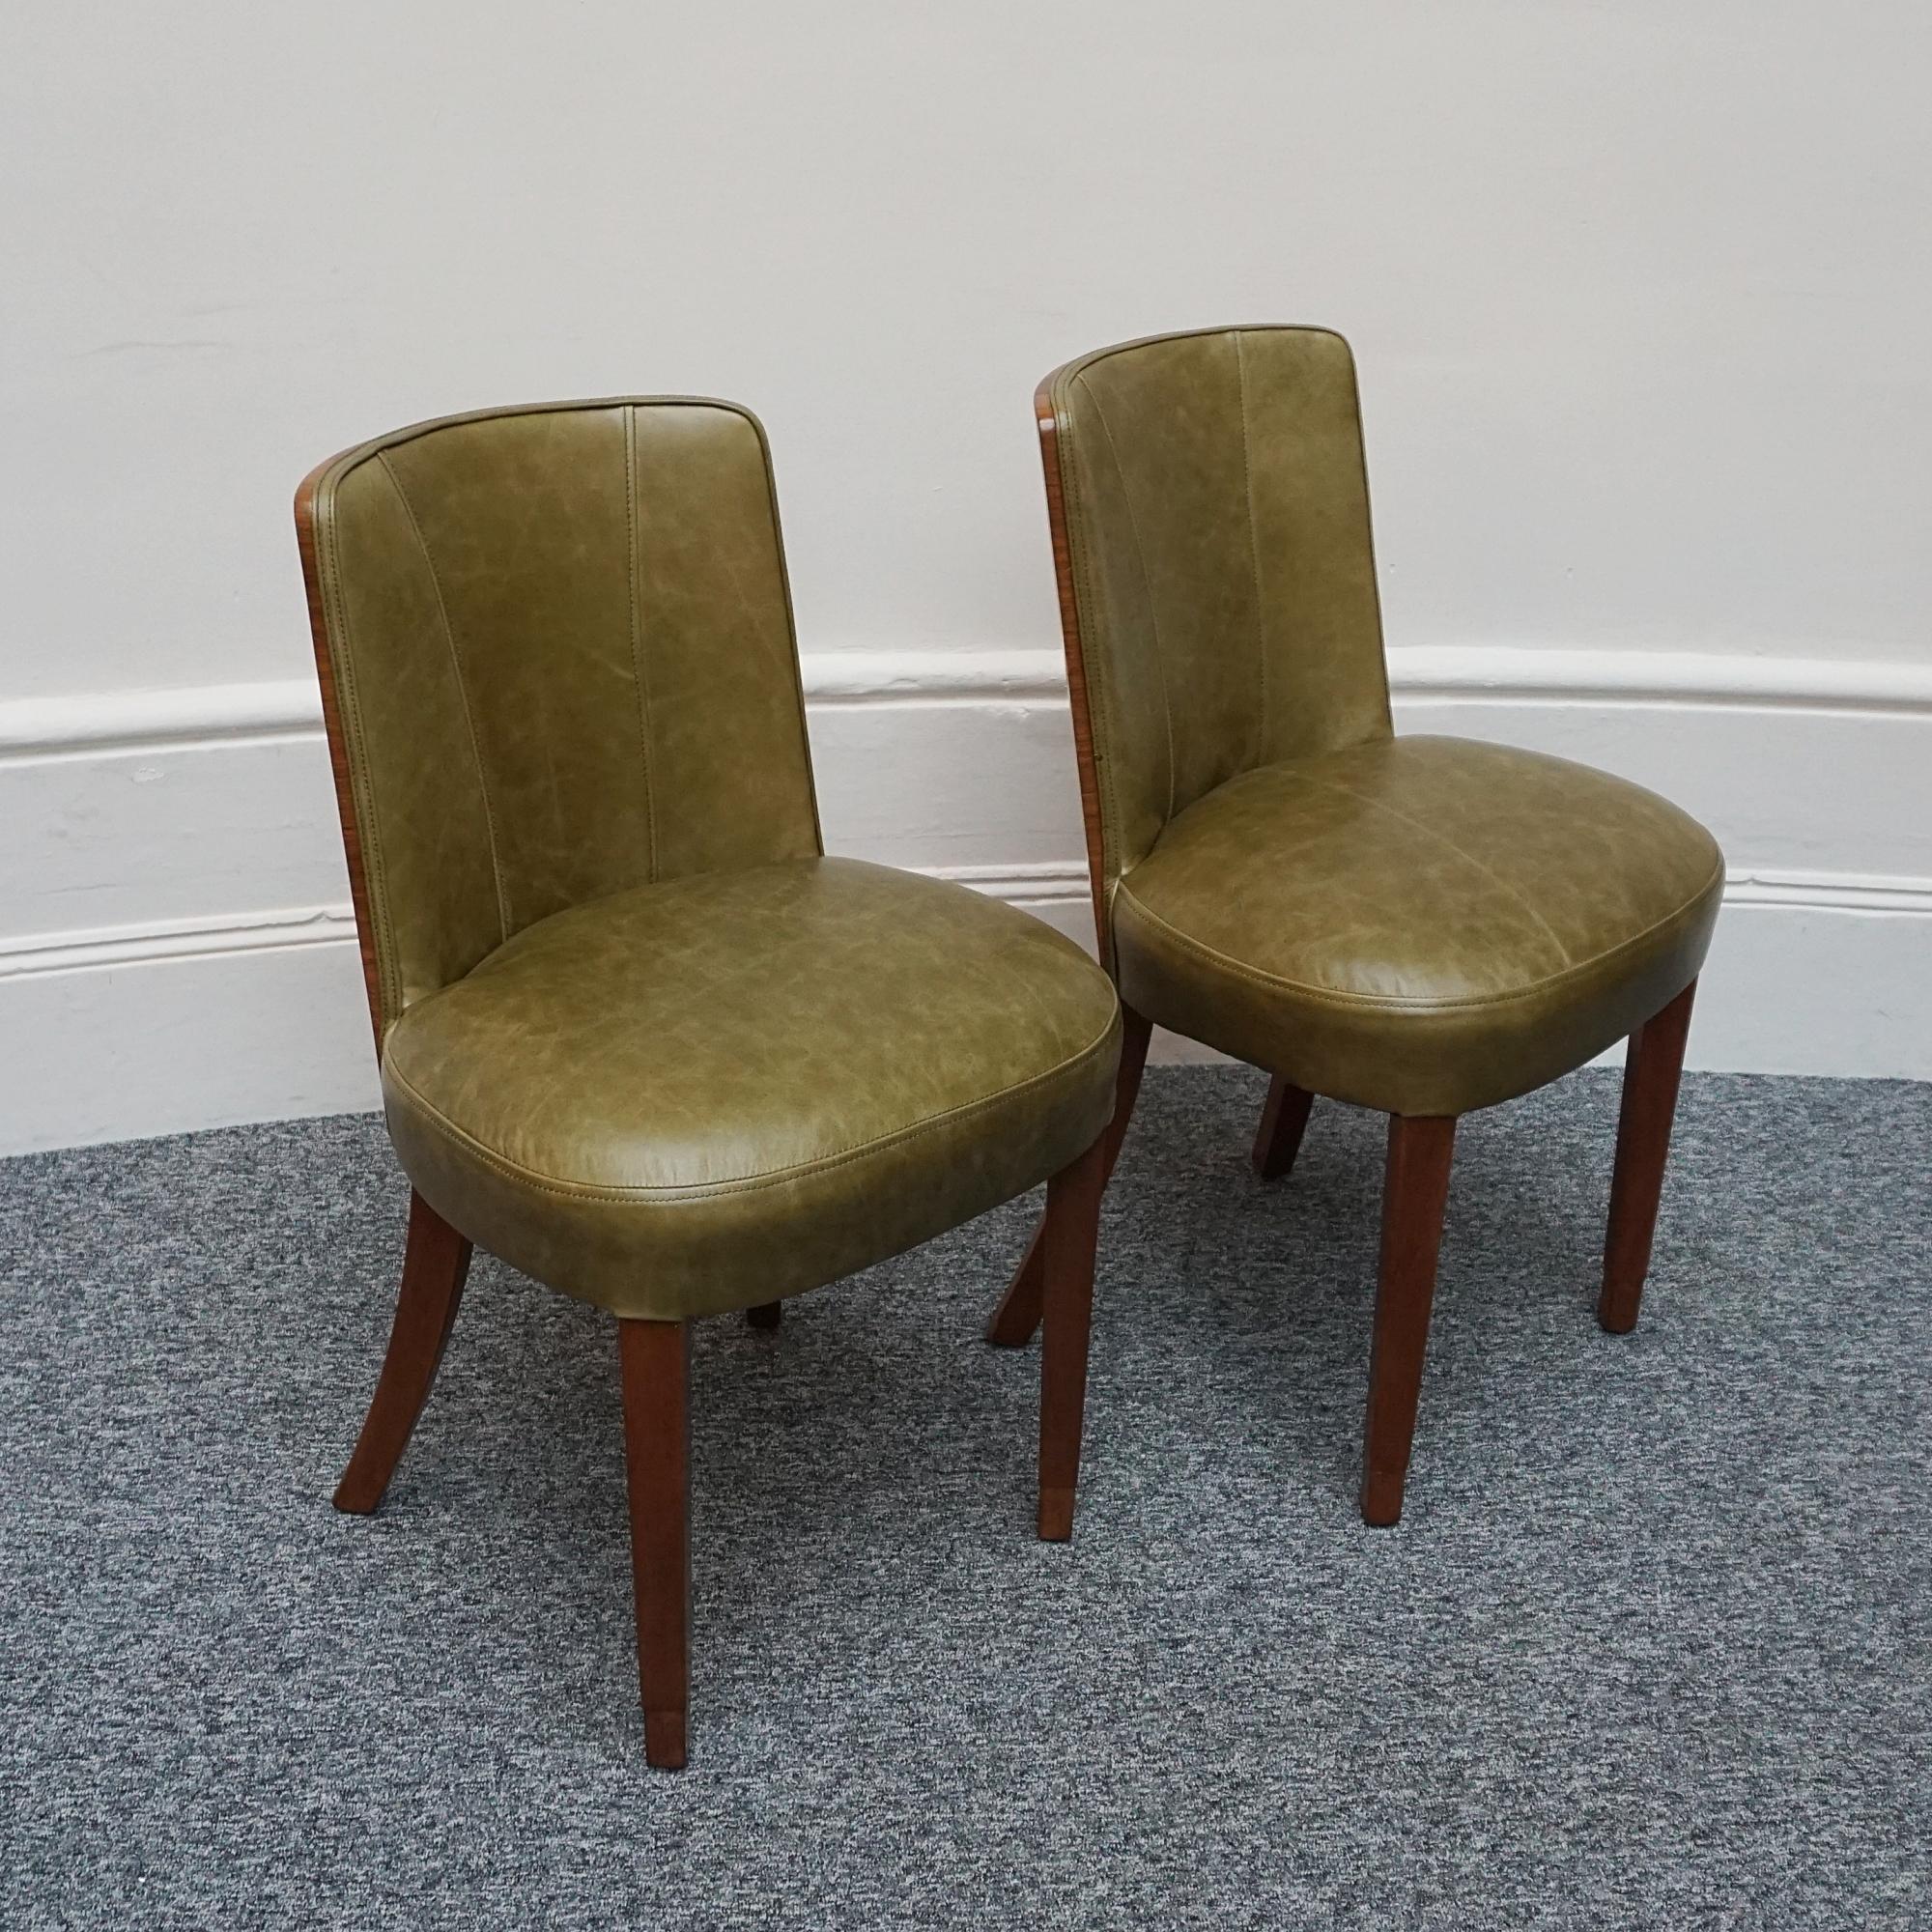 English Pair of Figured Walnut Veneered Art Deco Side Chairs Green Leather Upholstery